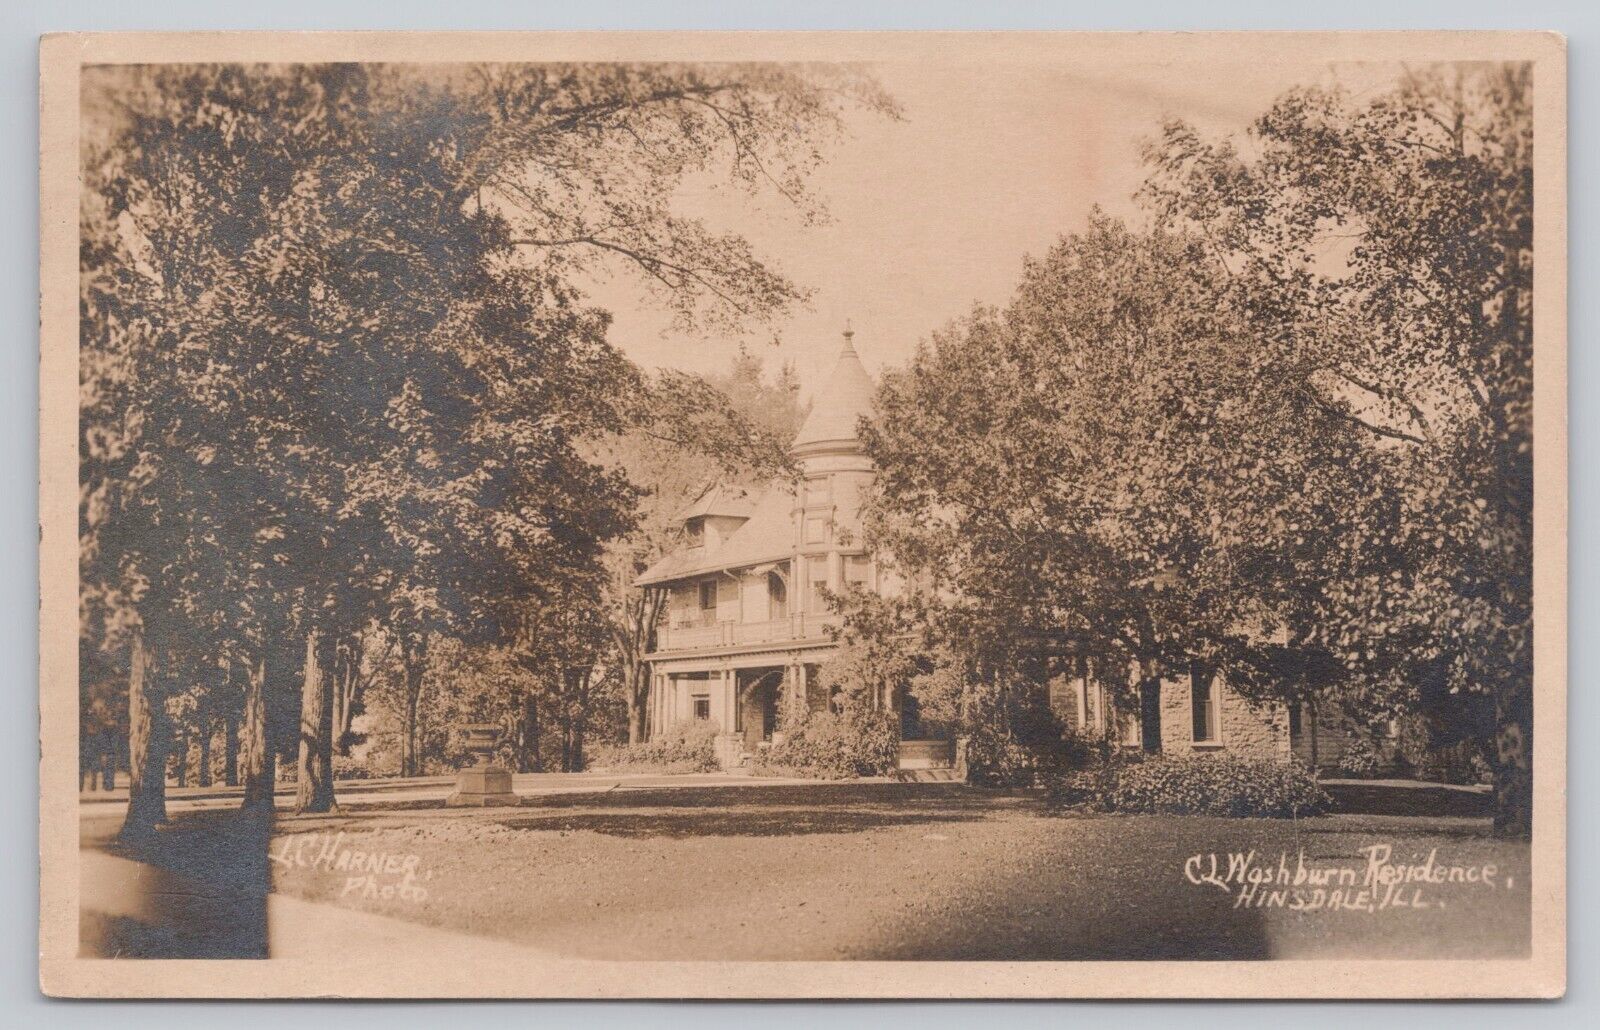 Hinsdale Illinois, CL Washburn Residence Home, Vintage RPPC Real Photo Postcard